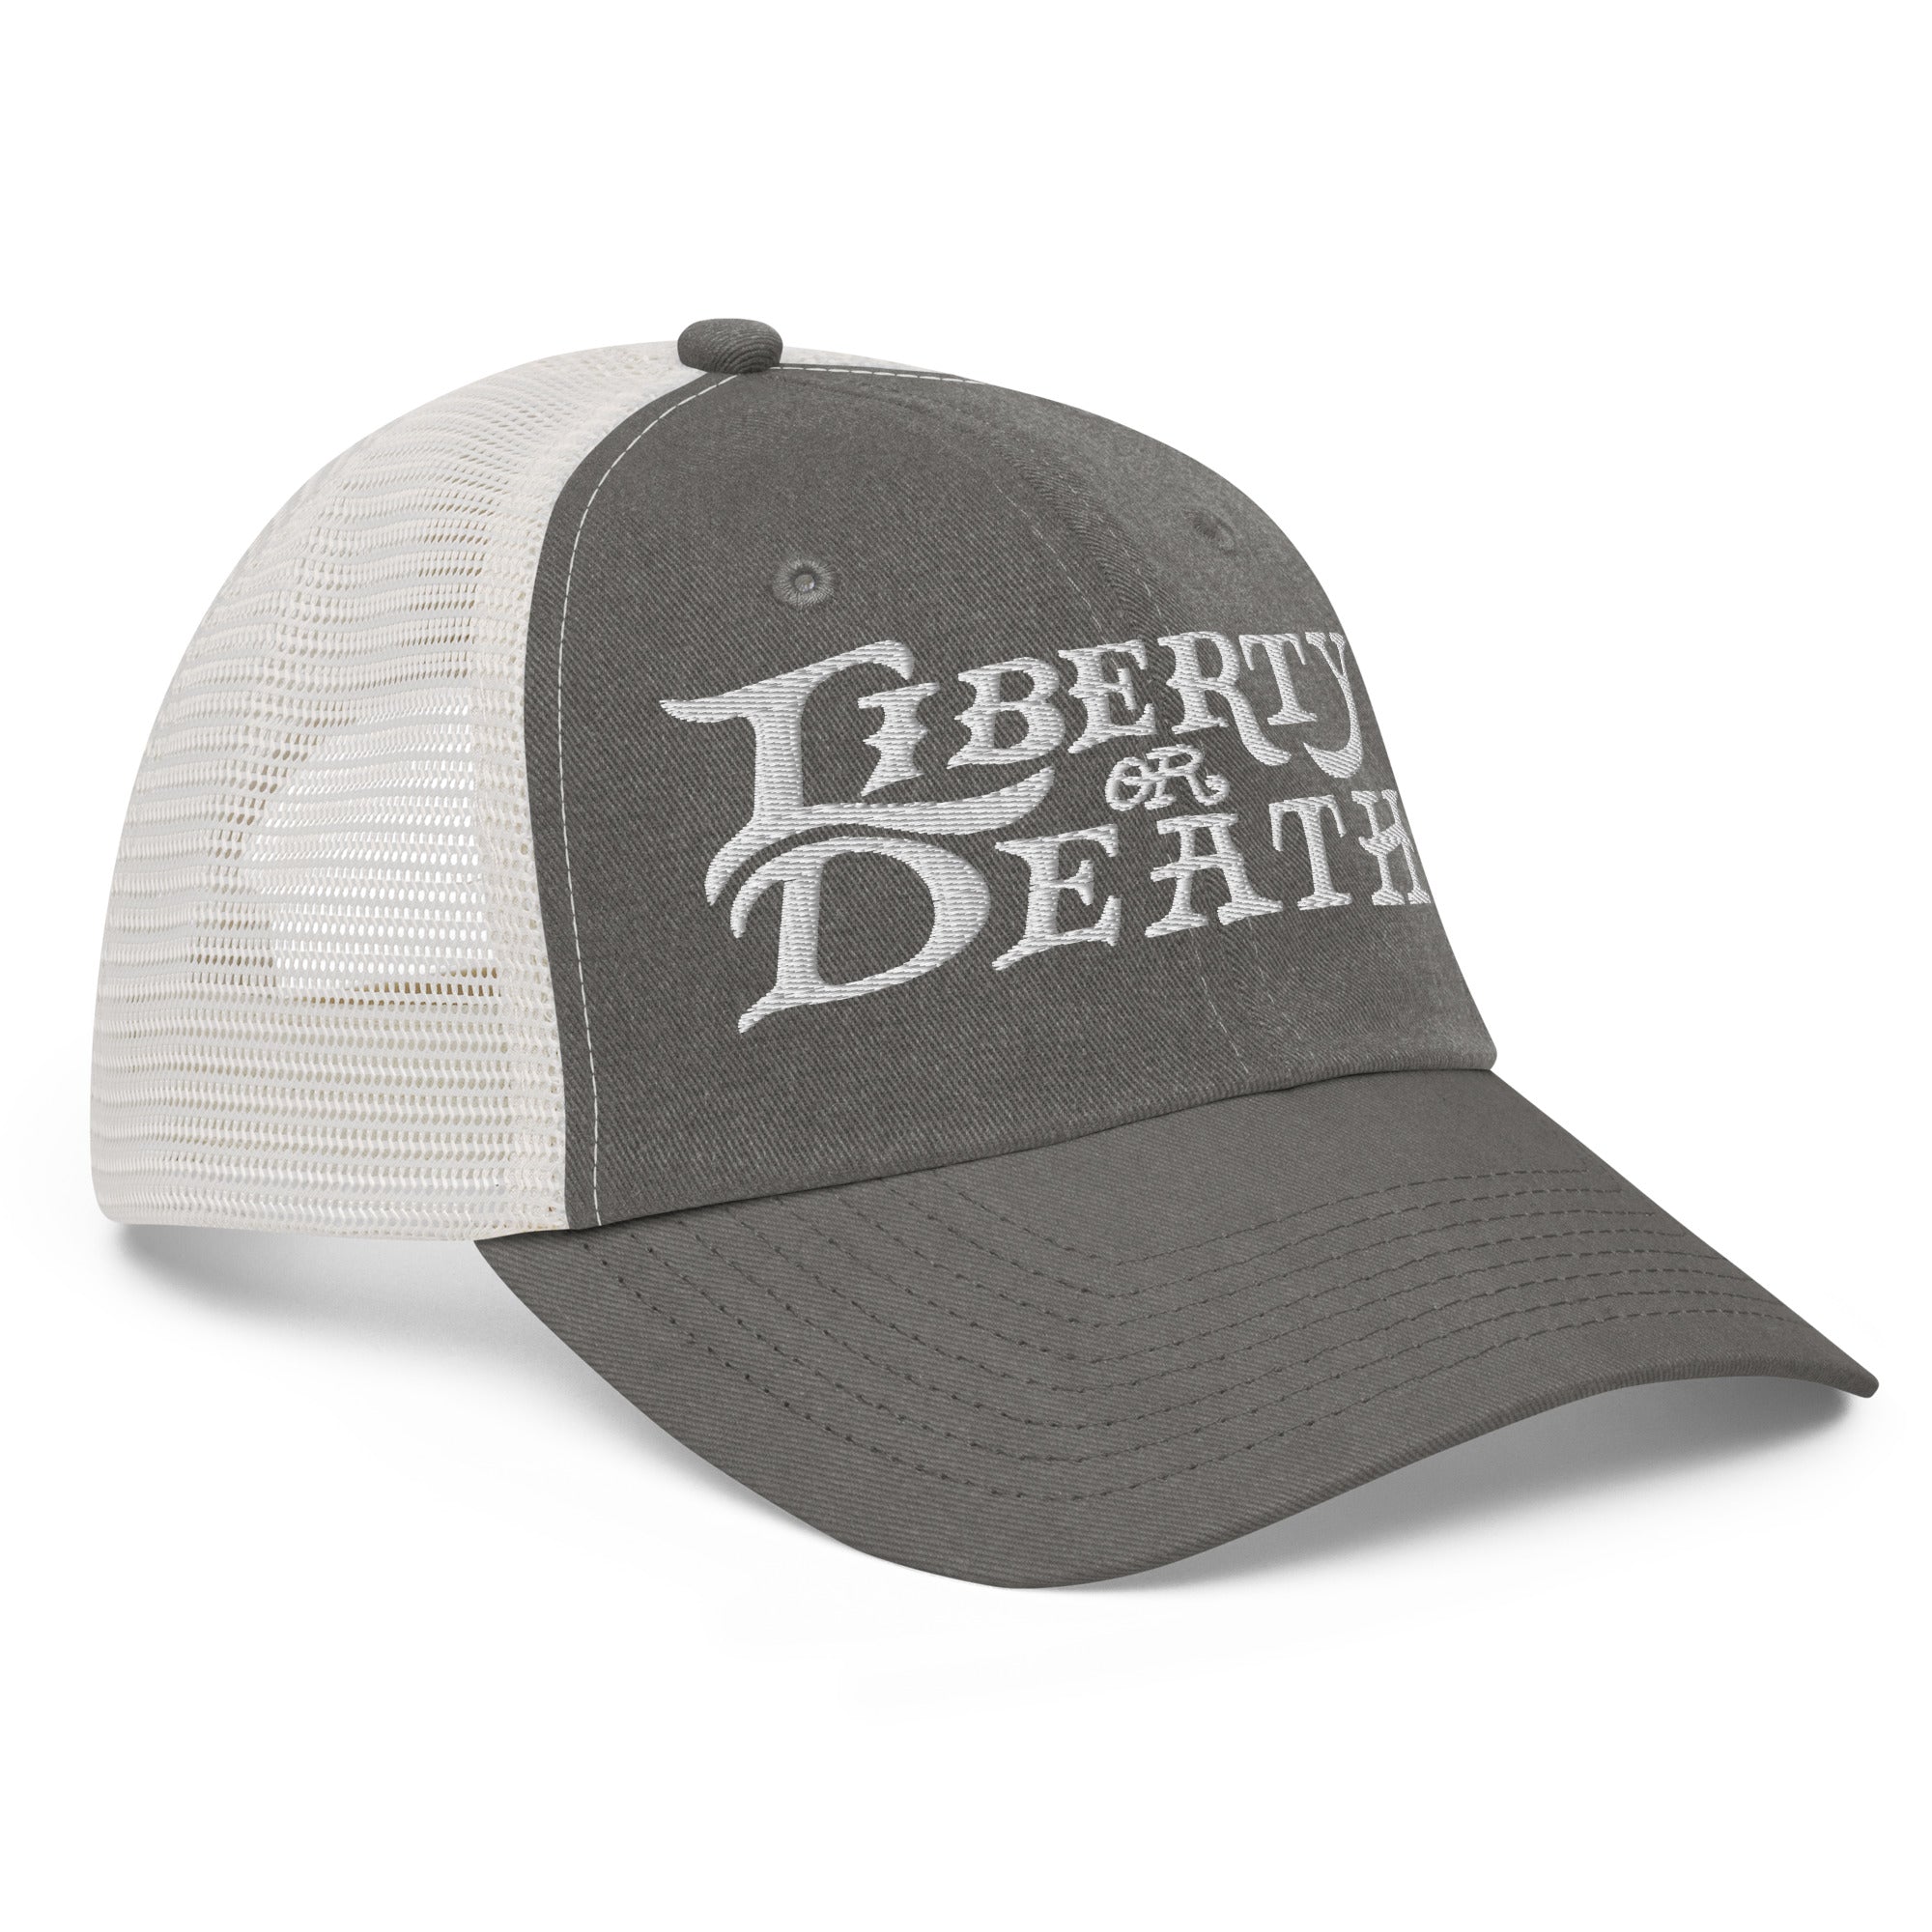 Liberty or Death Hand Lettered Pigment-dyed cap